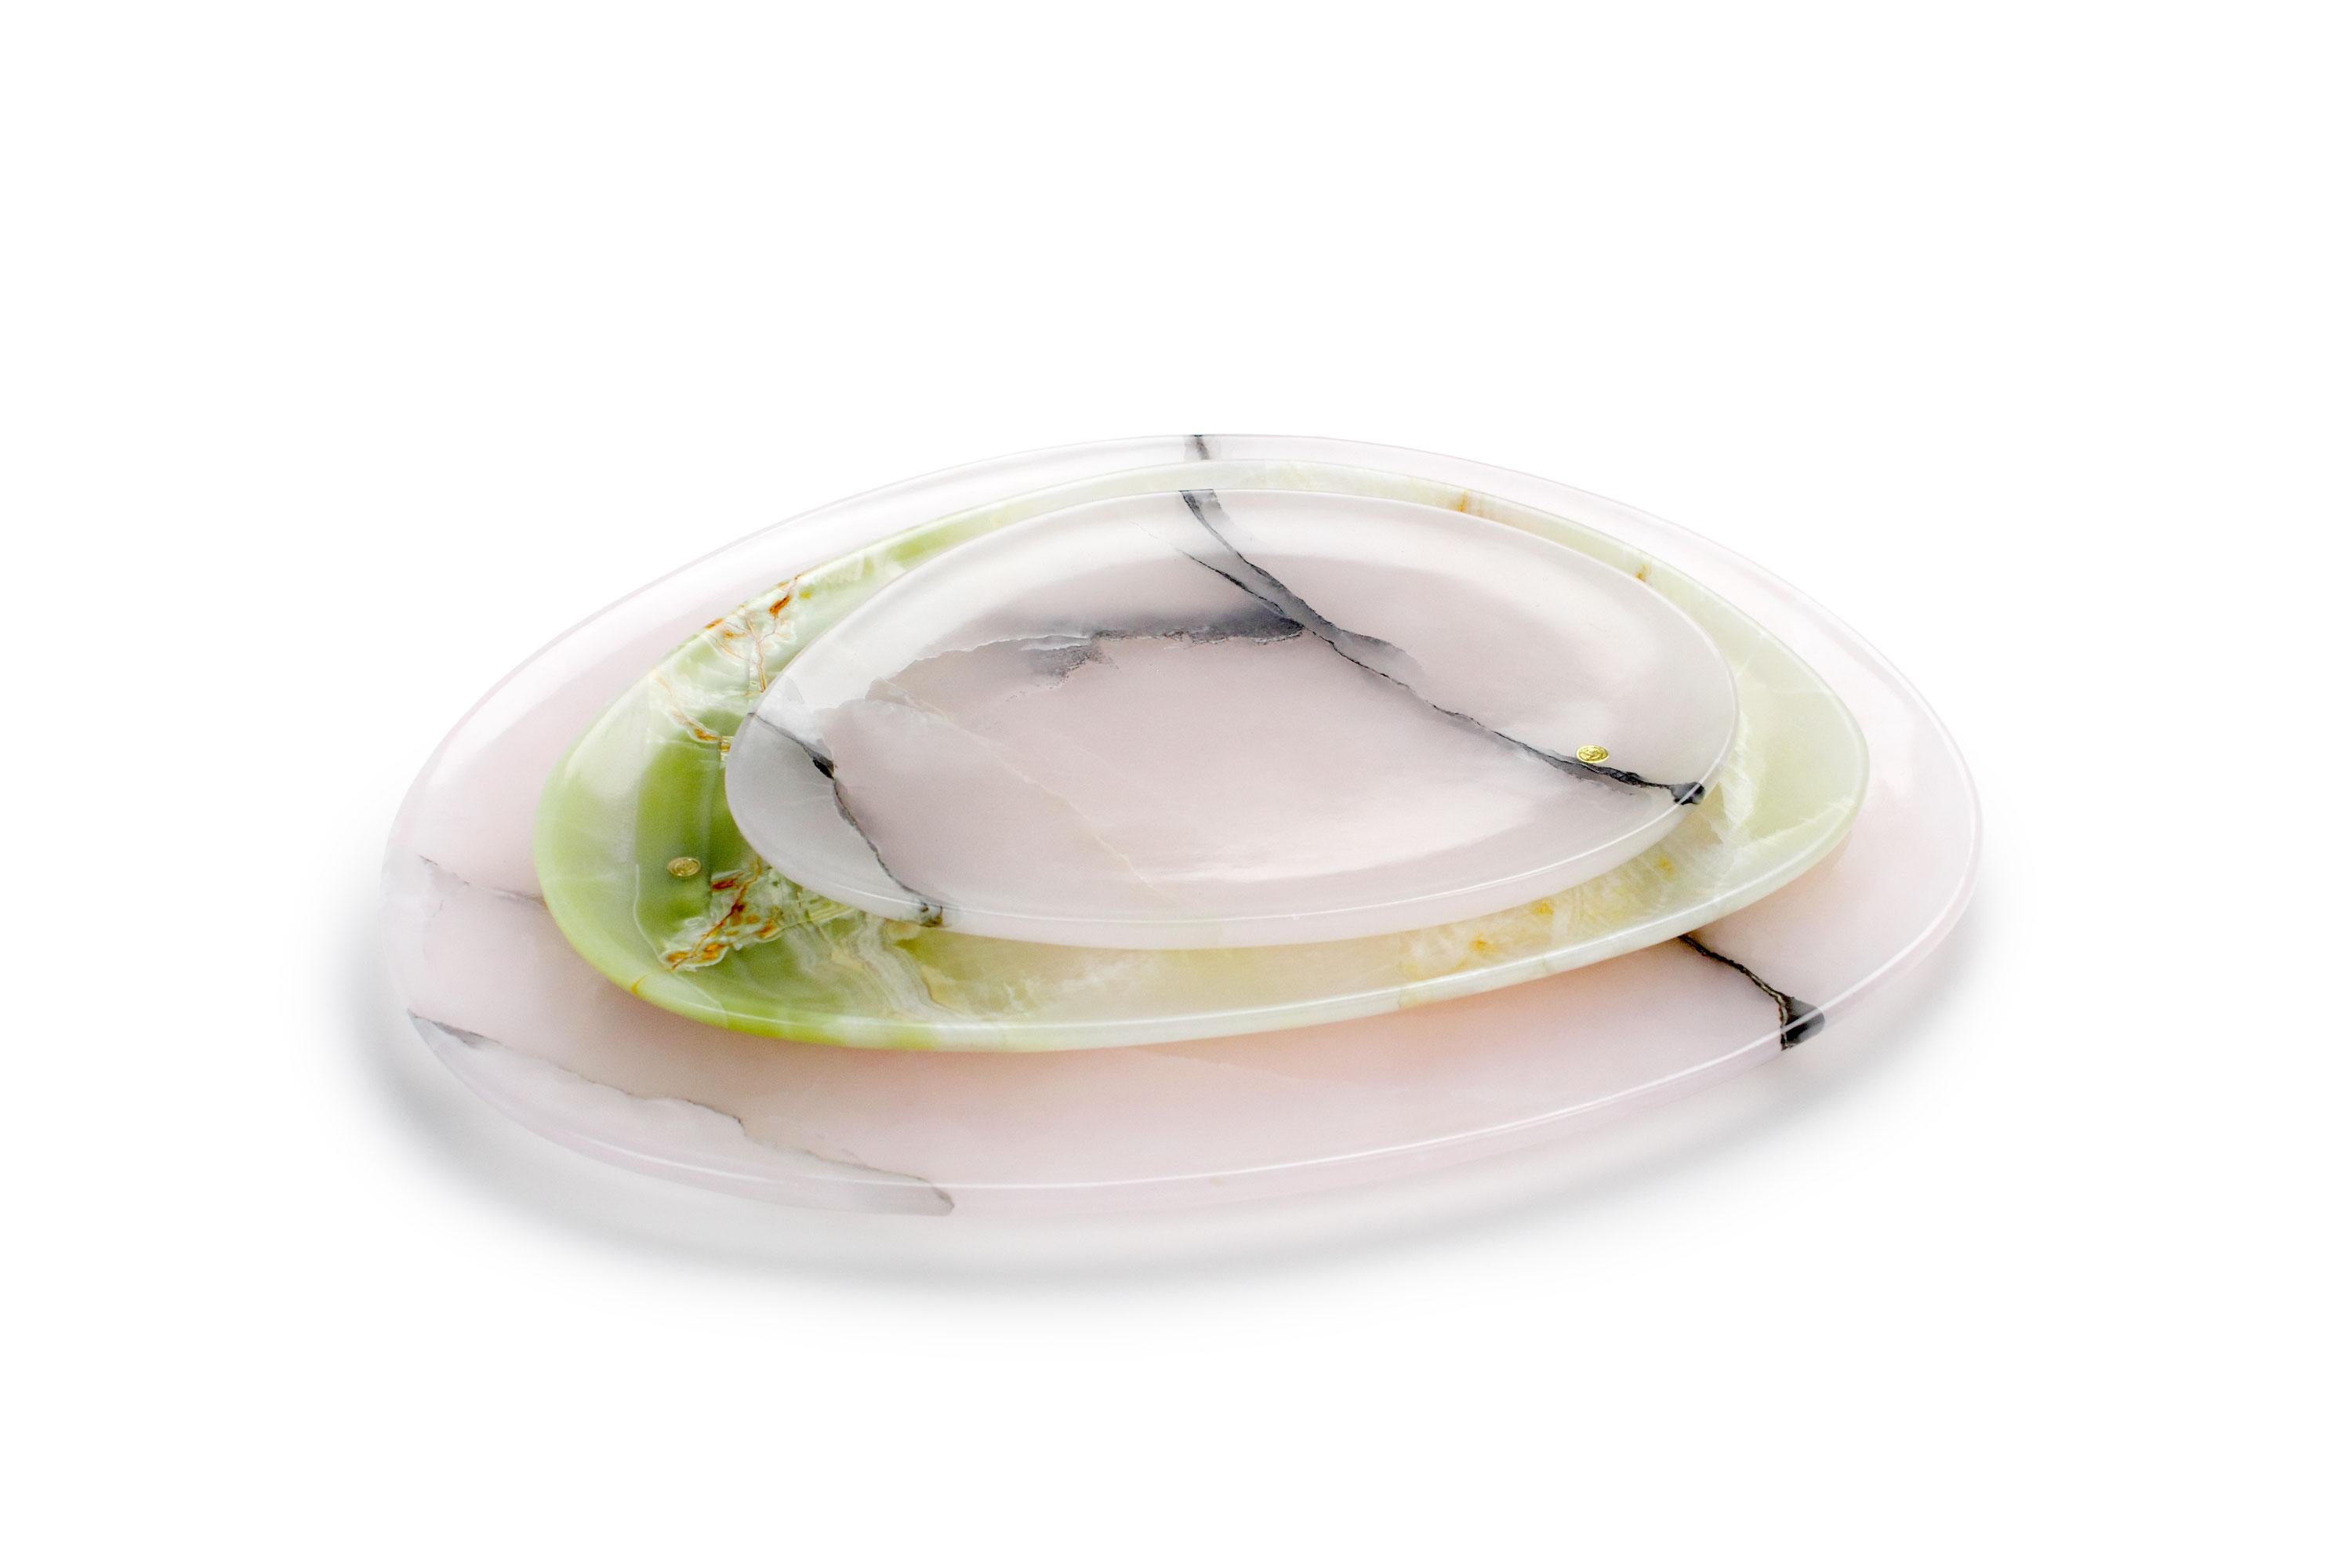 Hand carved presentation plates in green onyx and pink onyx. 
Multiple use as plates, platters and placers. 

Dimensions: Small - L 24 W 20 H 1.8 cm, Medium - L 30 W 28 H 1.8 cm, Big - L 36 W 35 H 1.8 cm.
Available in different marbles, onyx and